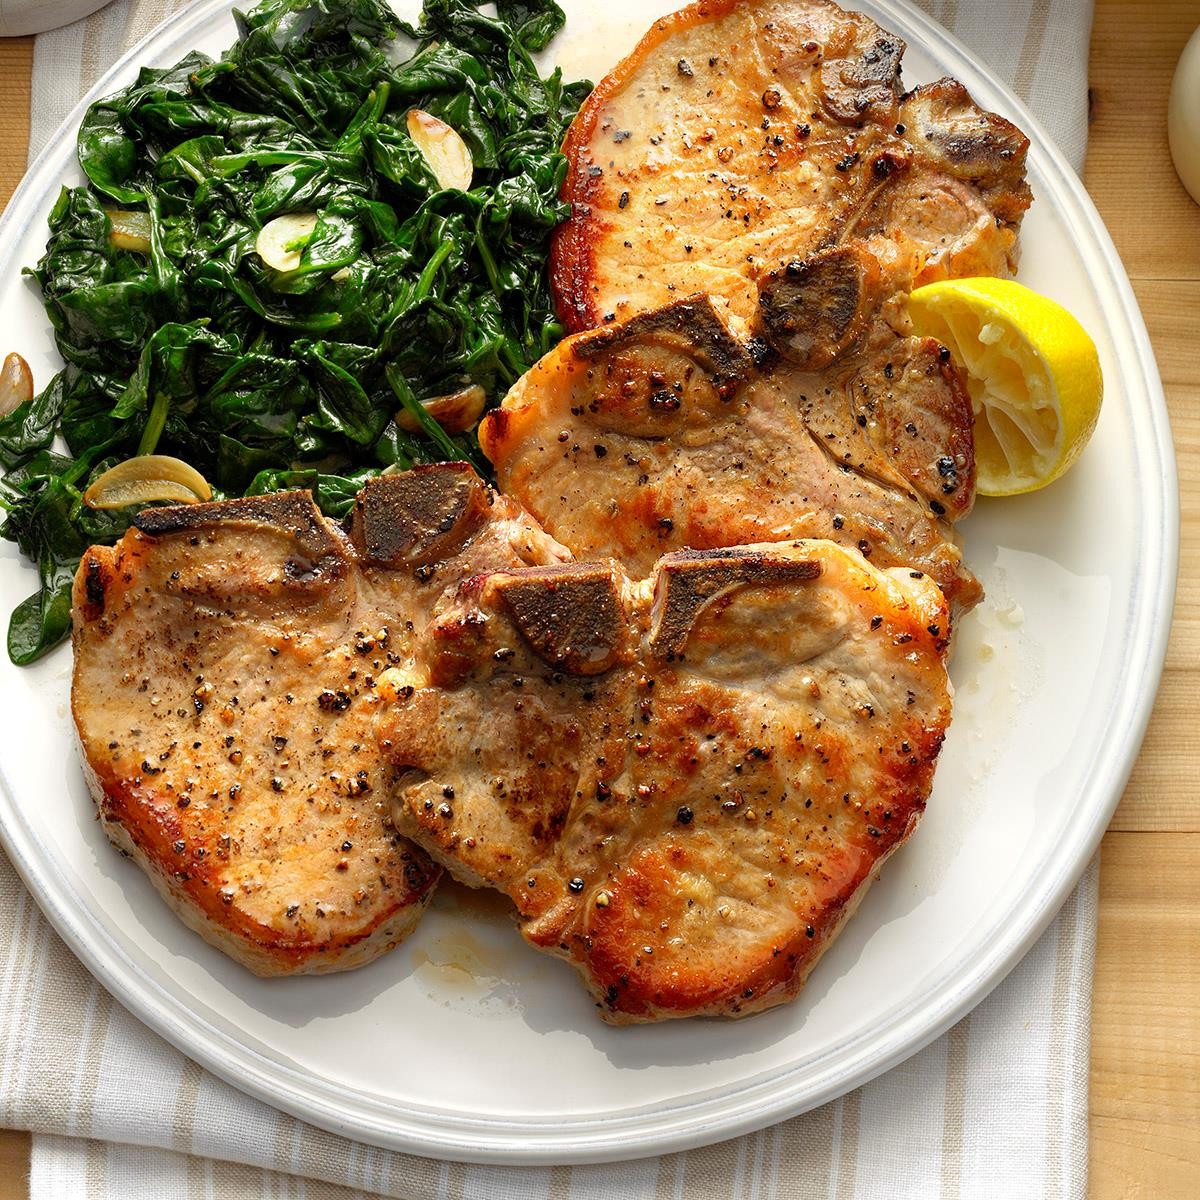 Healthy Sides For Pork Chops
 Sauteed Pork Chops with Garlic Spinach Recipe